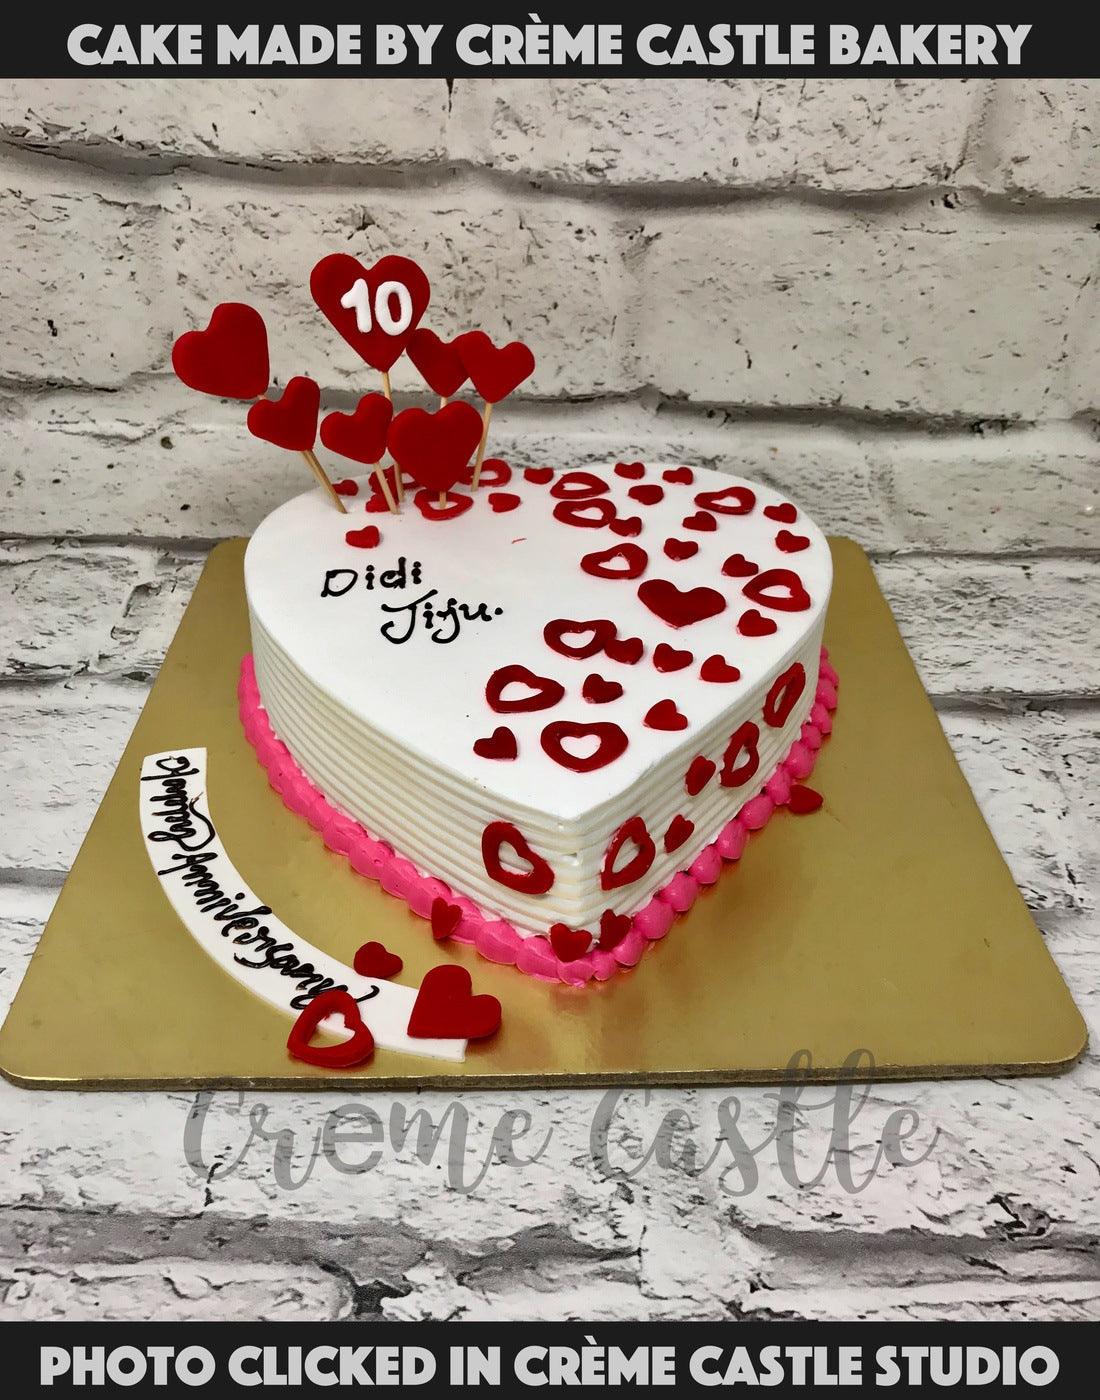 Red Anniversary Cakes With Couple Name Edit Online Free